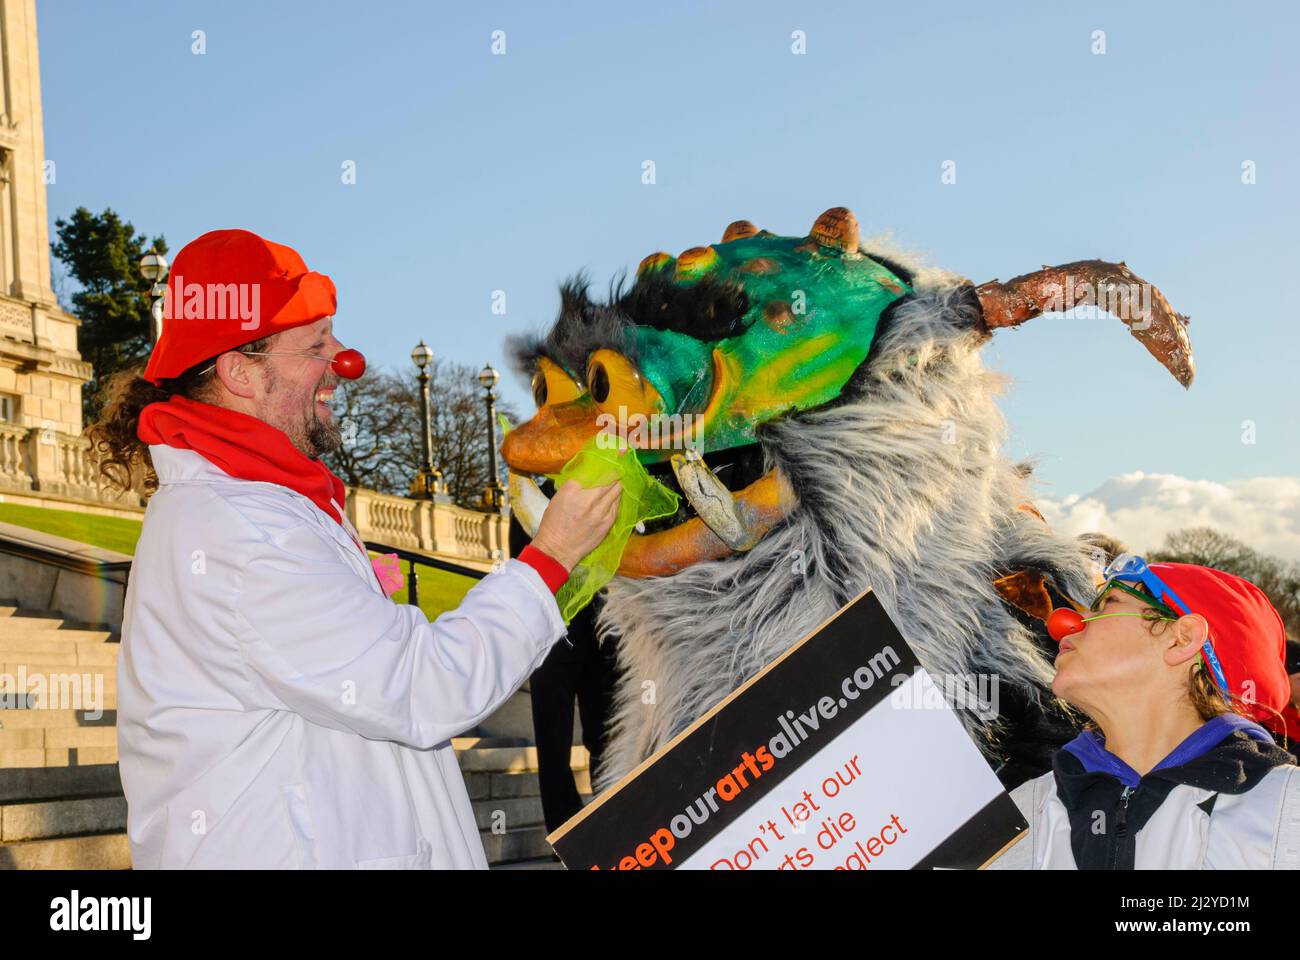 Belfast, Northern Ireland.  10th December 2007.  A man dressed as a clown wipes the nose of a large fury monster at a protest against cutting the arts budget. Stock Photo